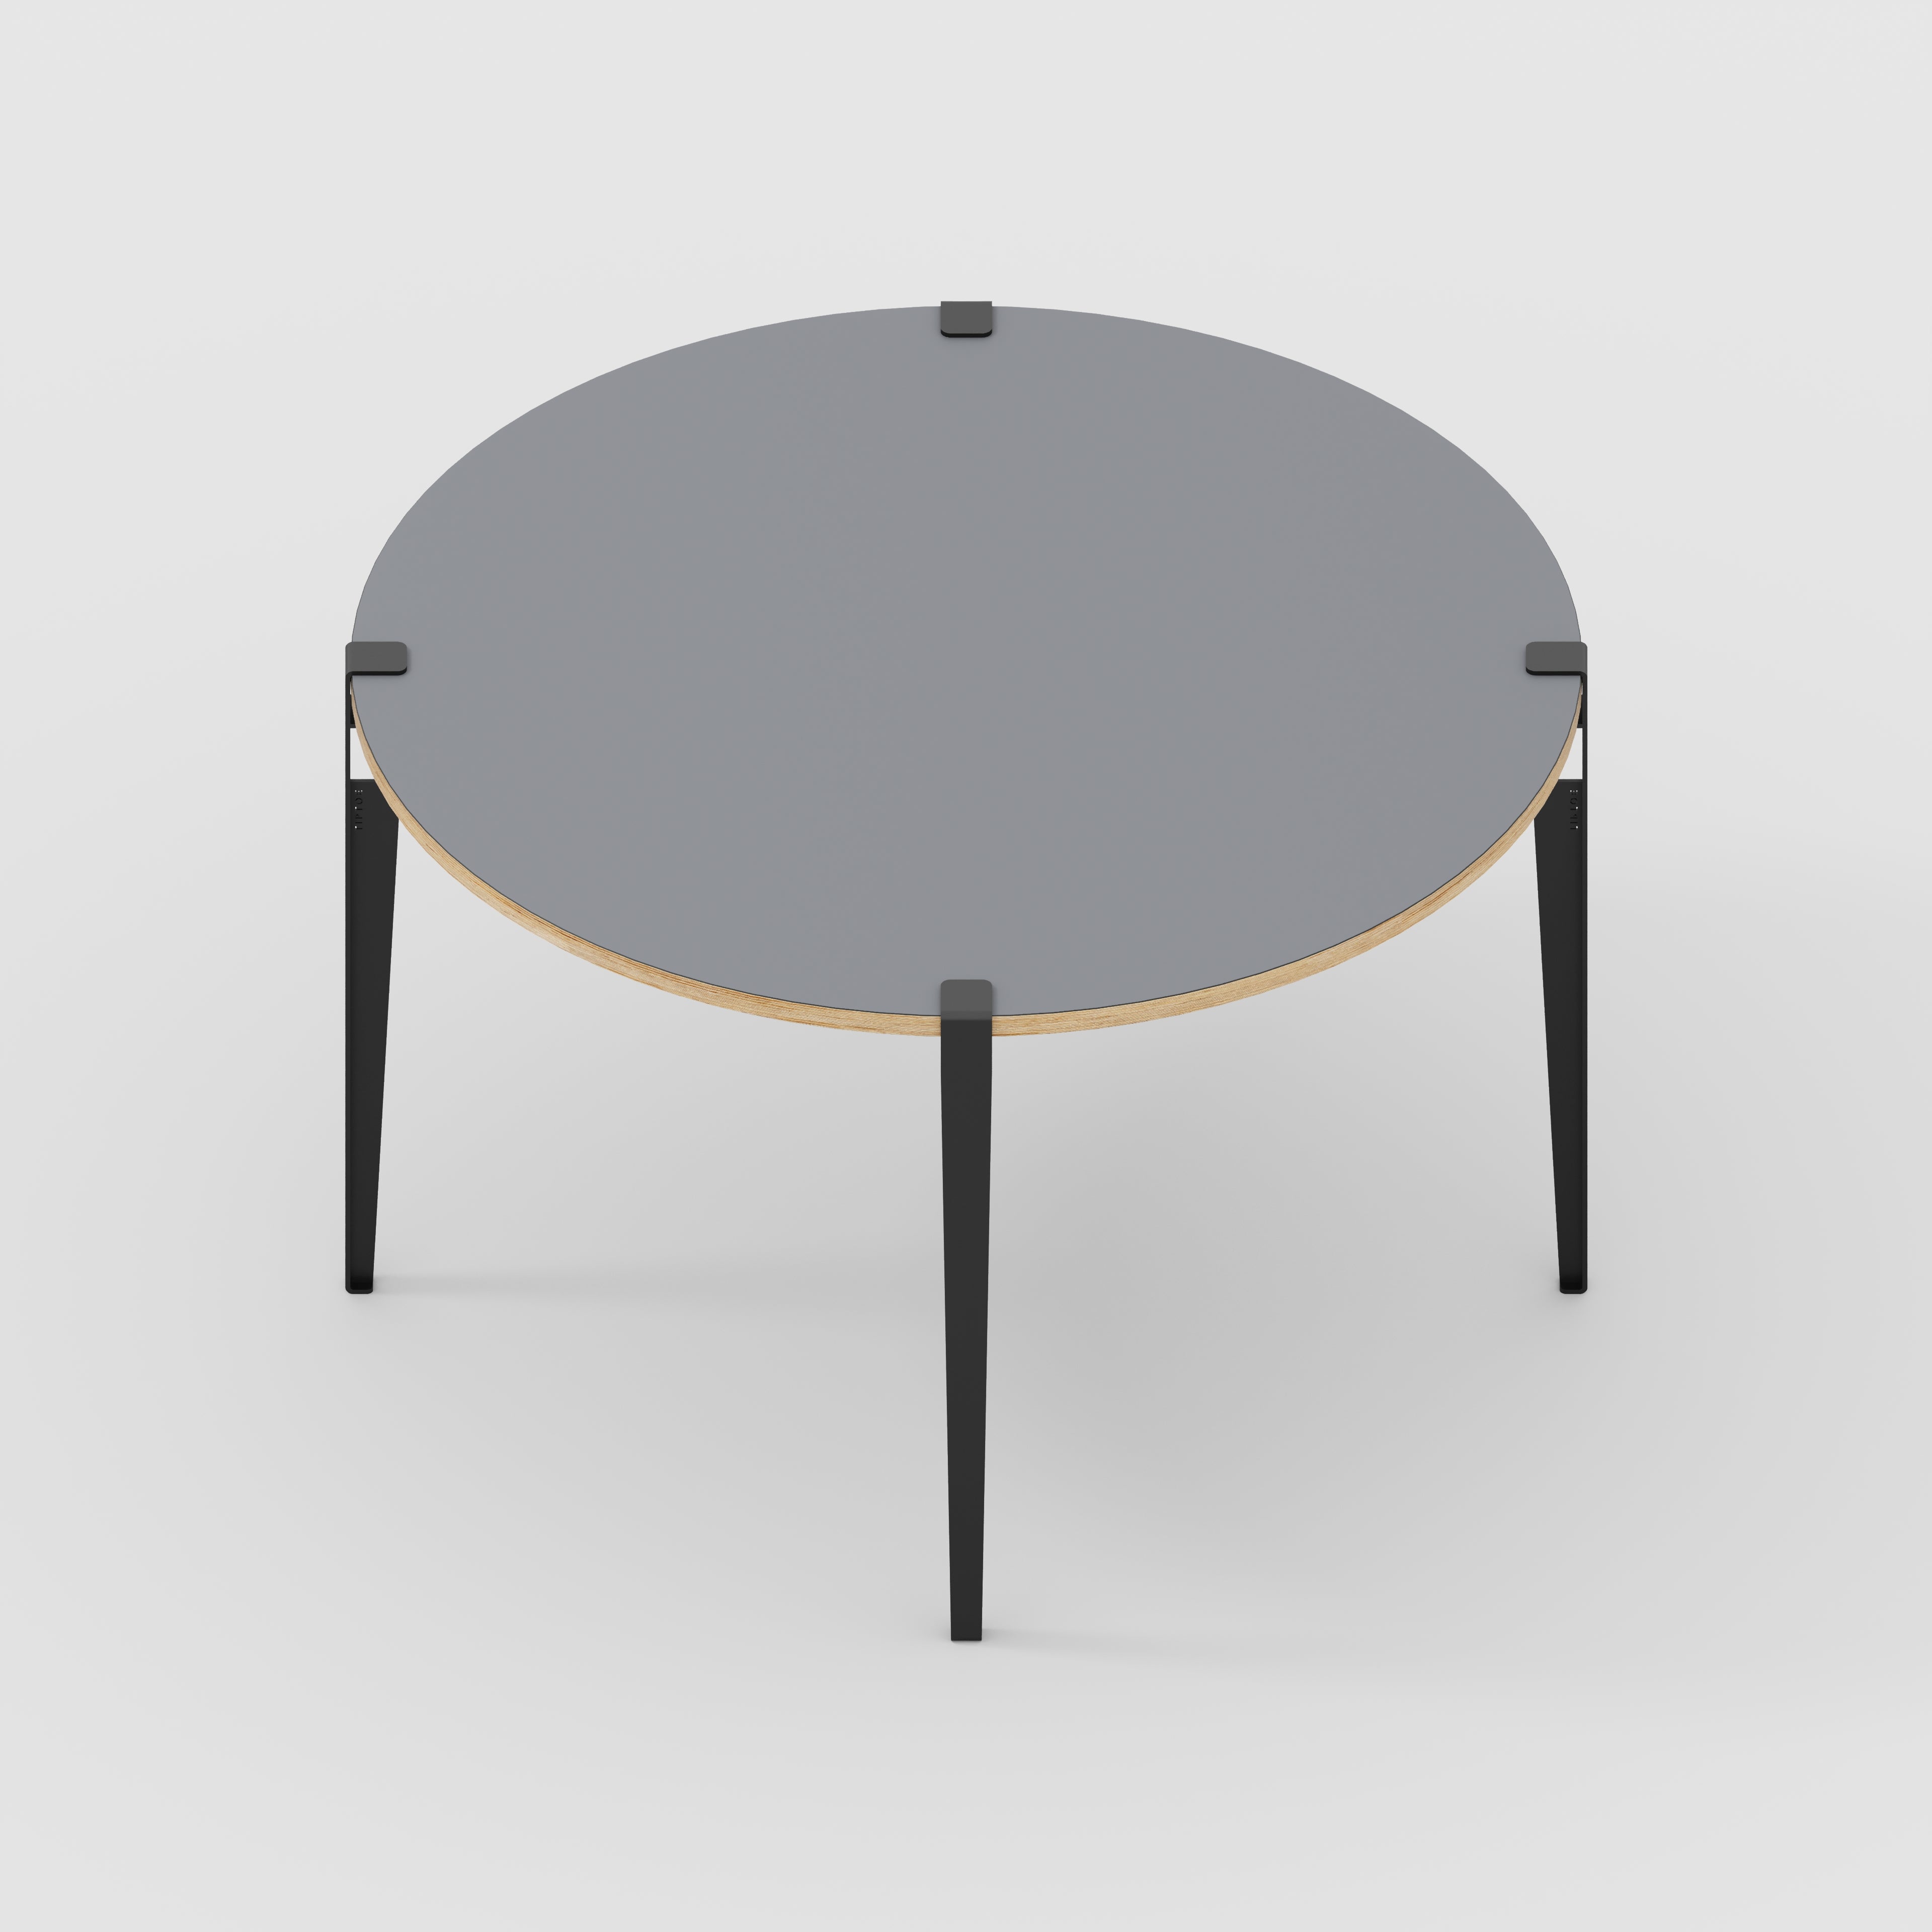 Round Table with Black Tiptoe Legs - Formica Tornado Grey - 1200(dia) x 750(h)